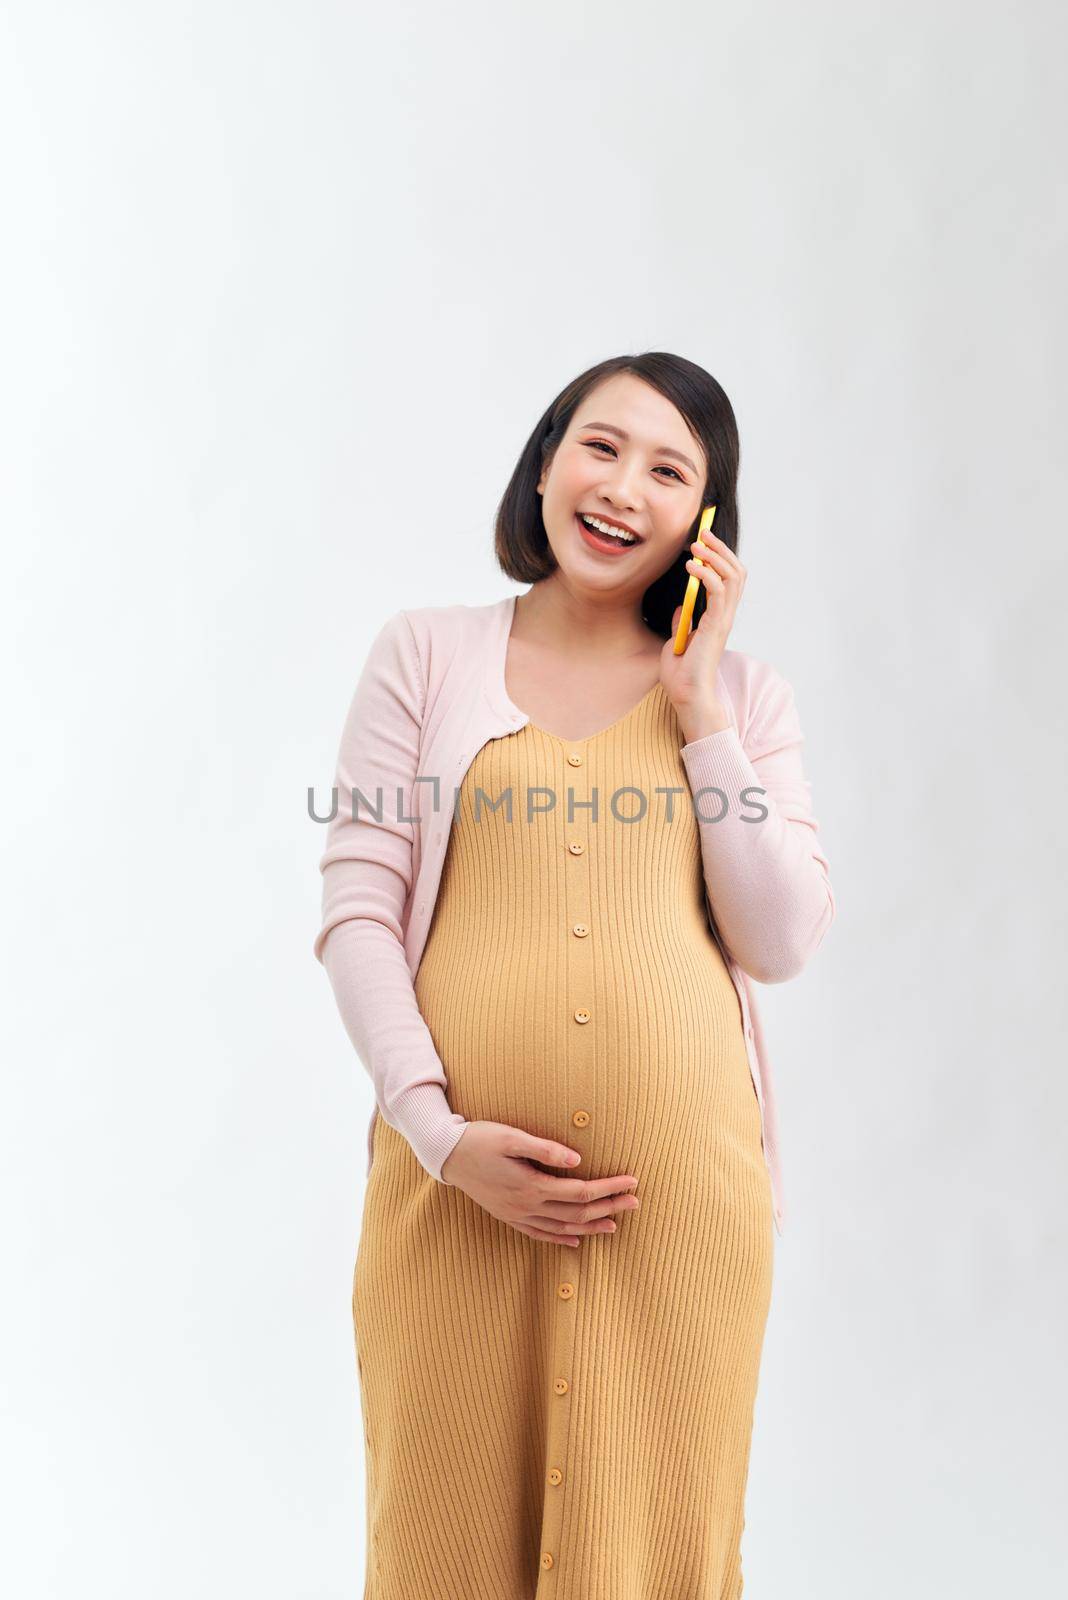 Pregnant woman talking on the phone against white background. Communication and pregnant concept.